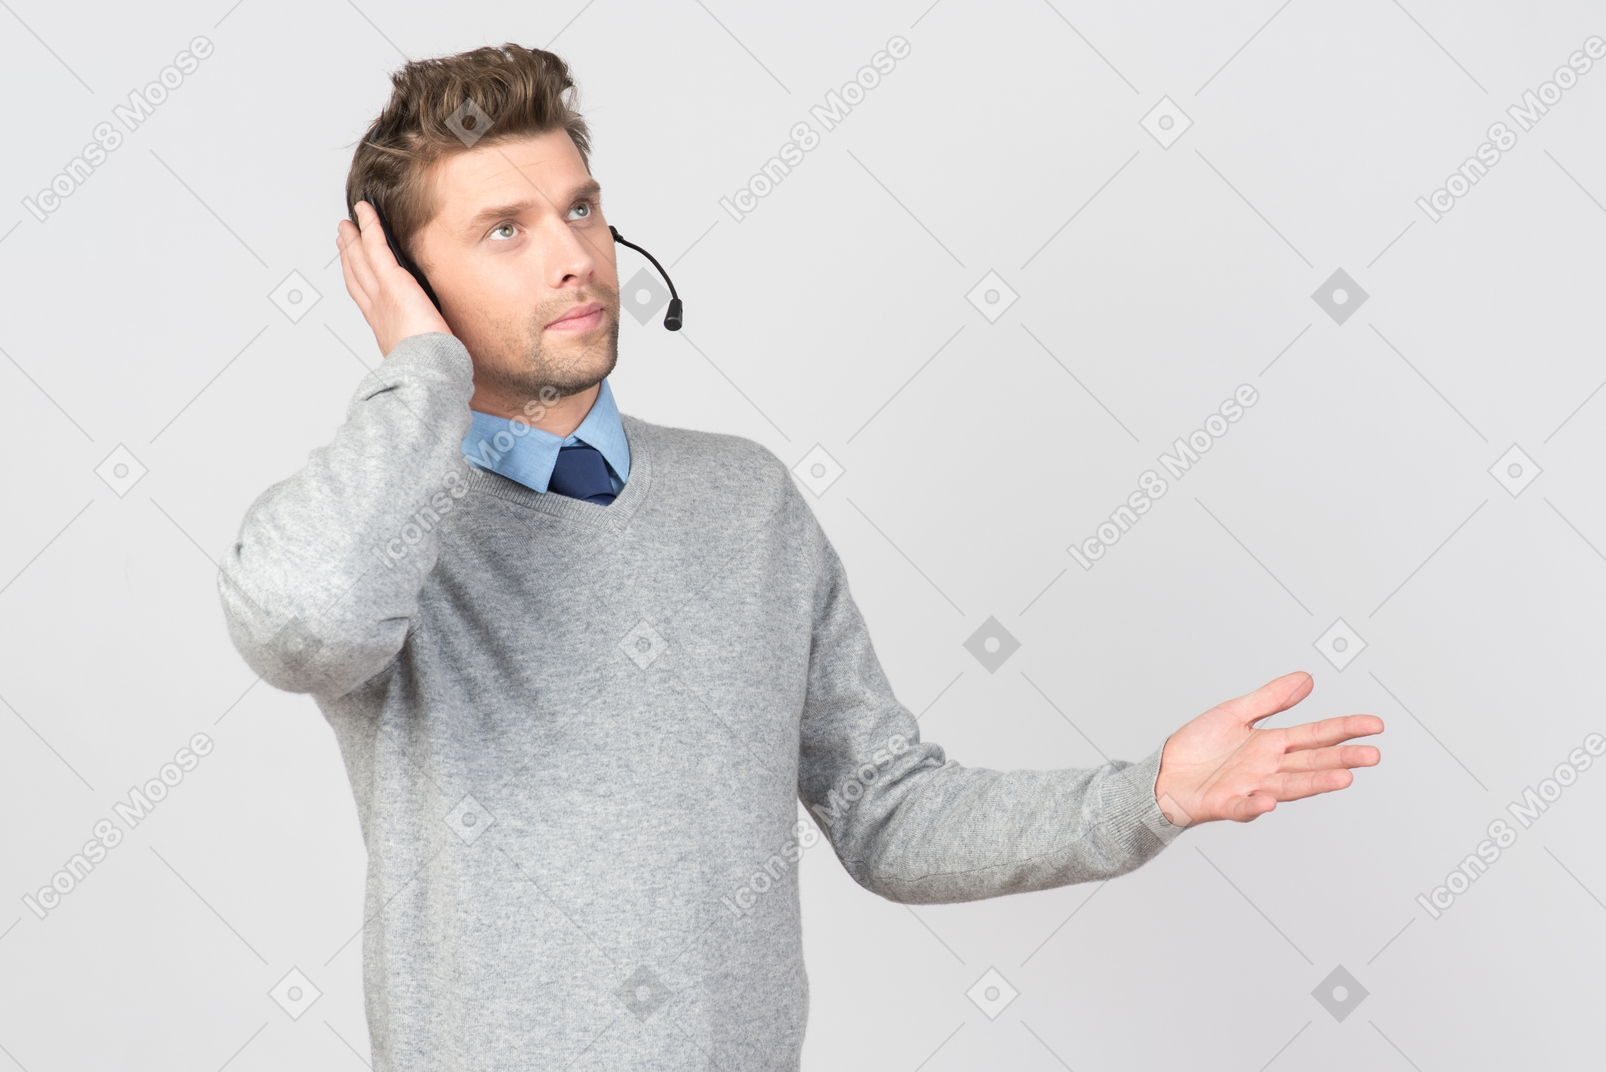 Call center agent touching headset and looking up